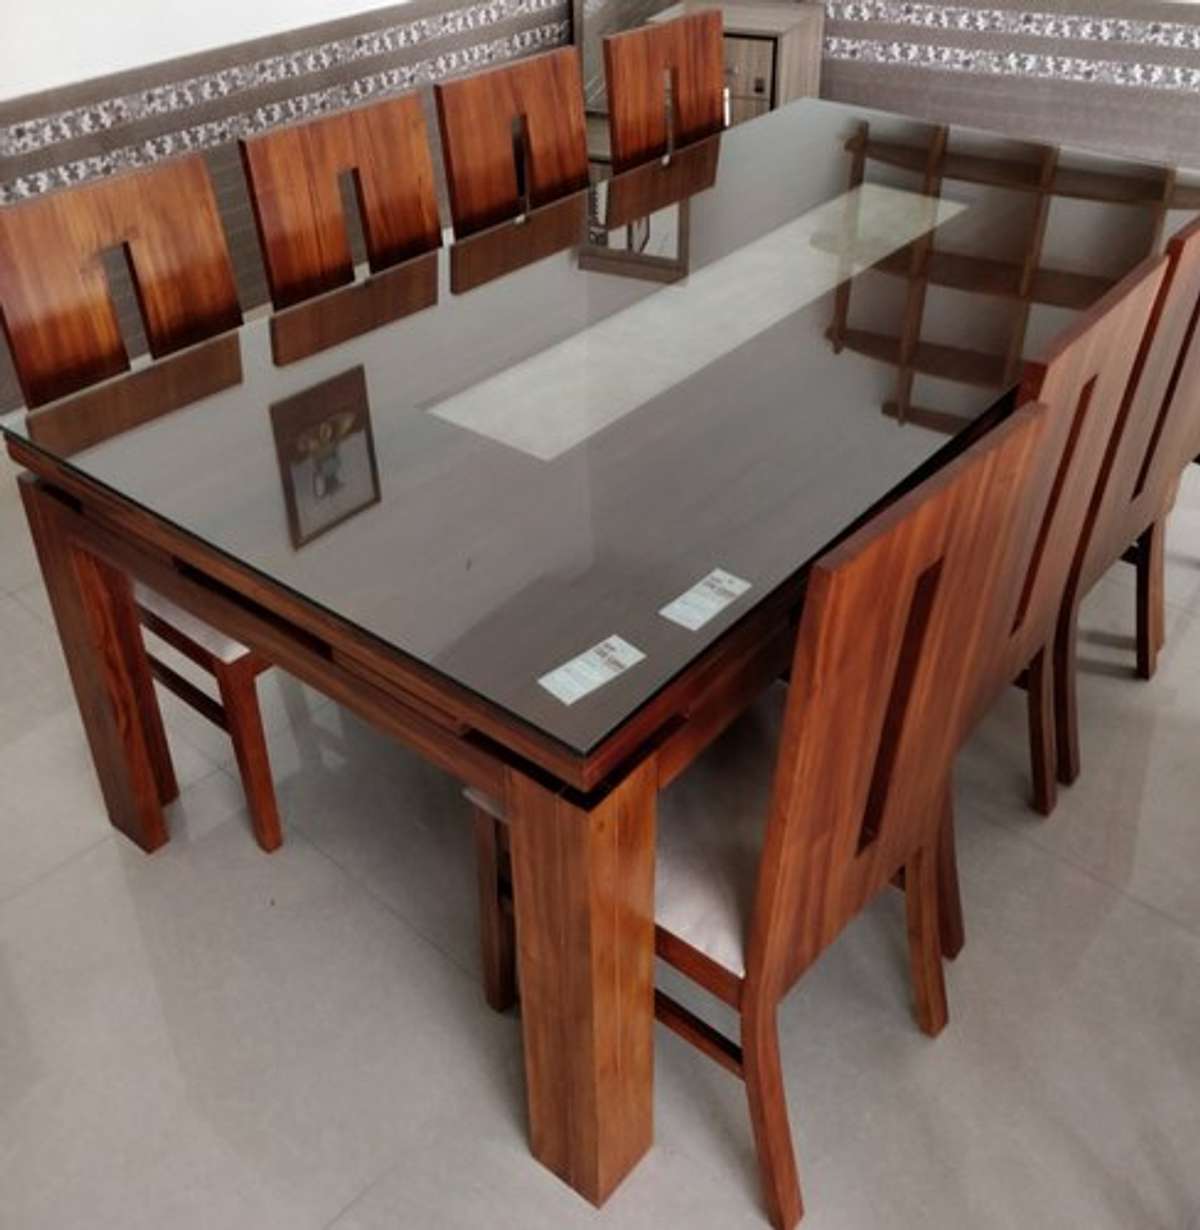 dining tables with chairs
starting at 22900




#KeralaStyleHouse #keralawood #DiningChairs #RectangularDiningTable #woodendesign